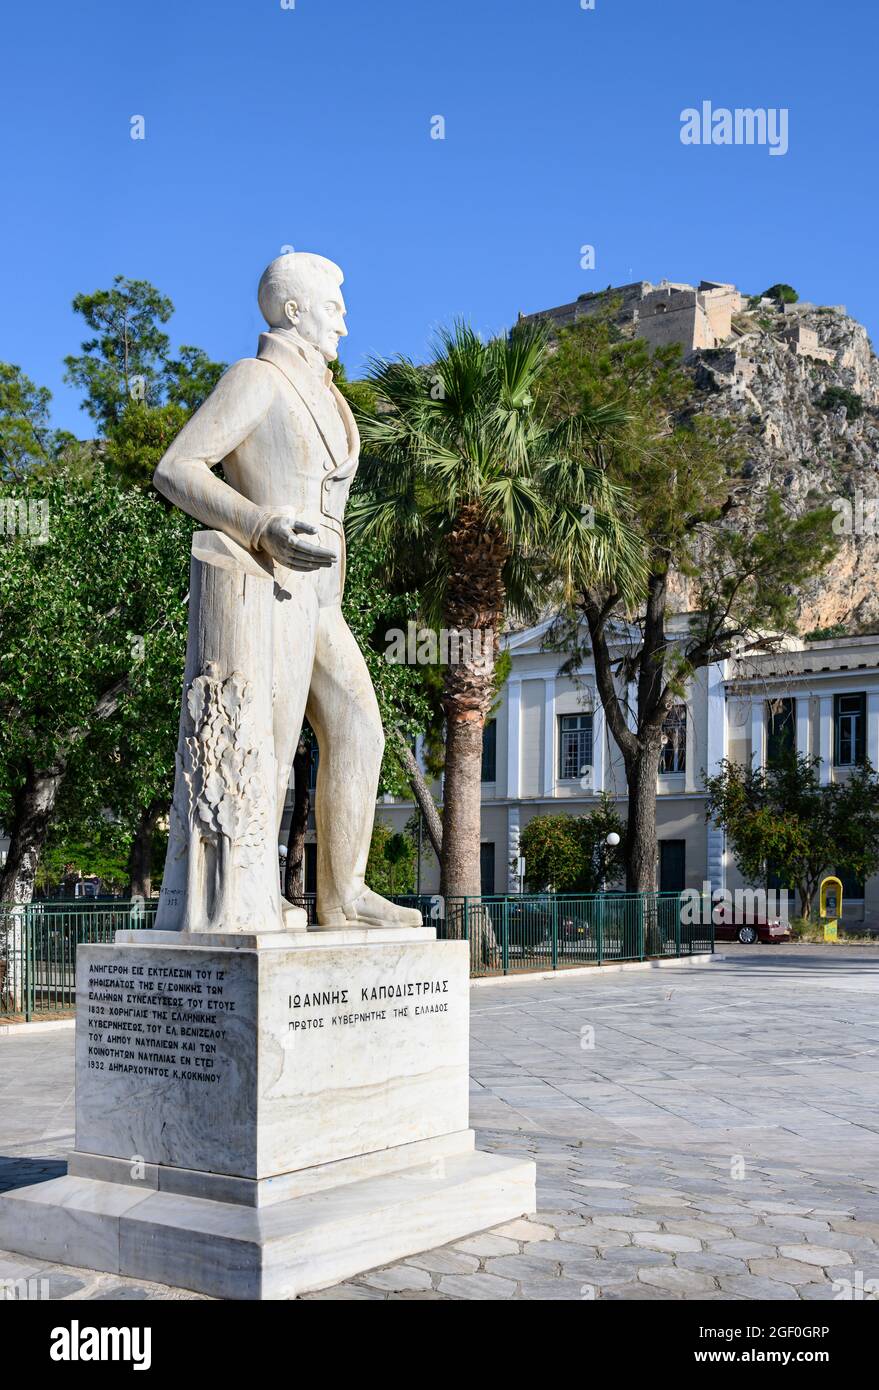 A statue of Ioannis Kapodistrias, the first head of state of independent Greece,  with  the Palamidhi fortress, in the background, Nafplio, Argolid, P Stock Photo